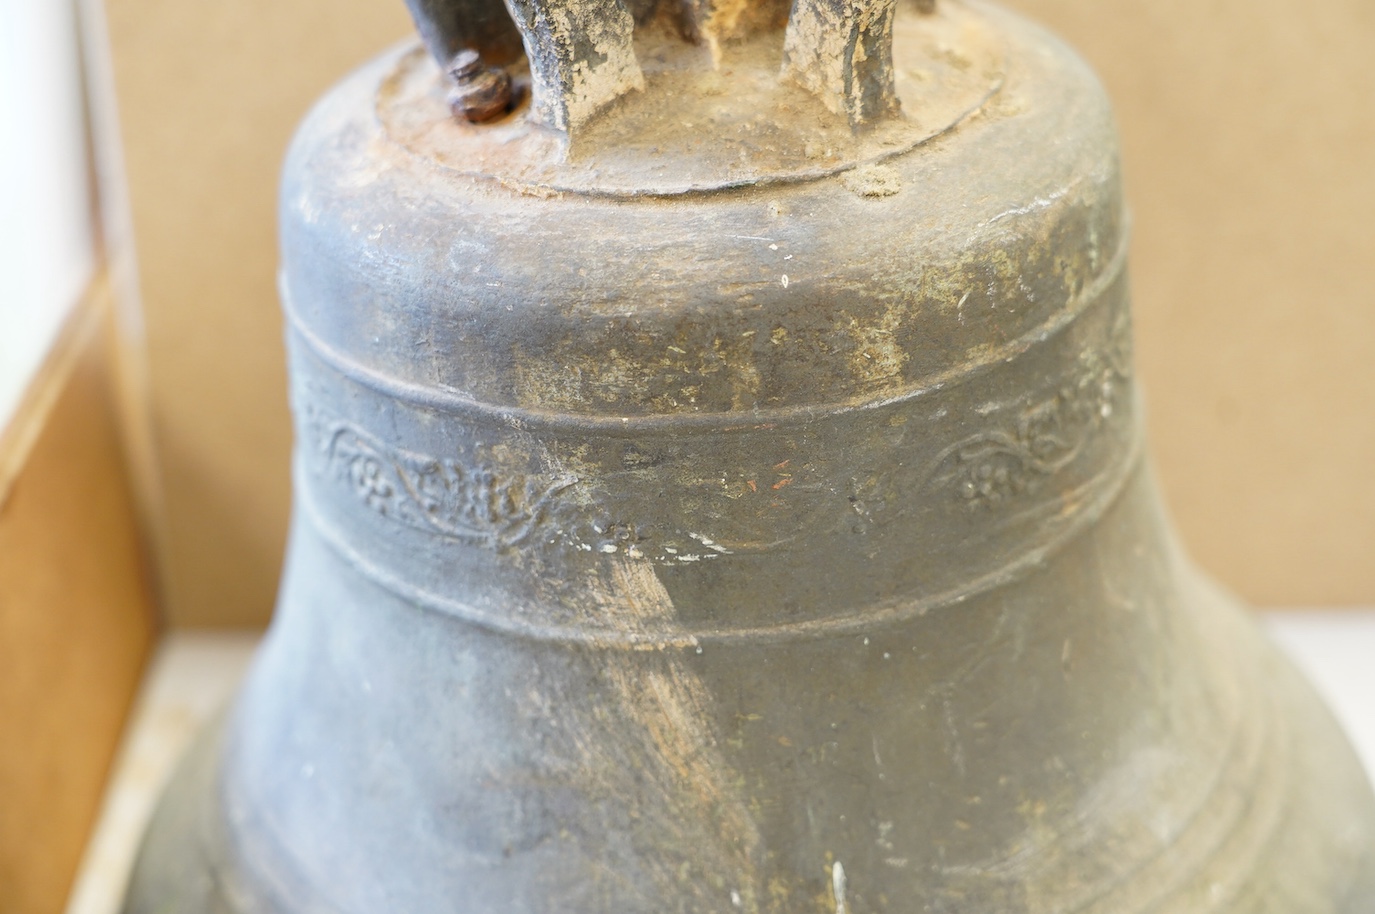 An 18th/19th century bronze bell, initialled TR, 33cm high. Condition - poor to fair, some losses to the rim